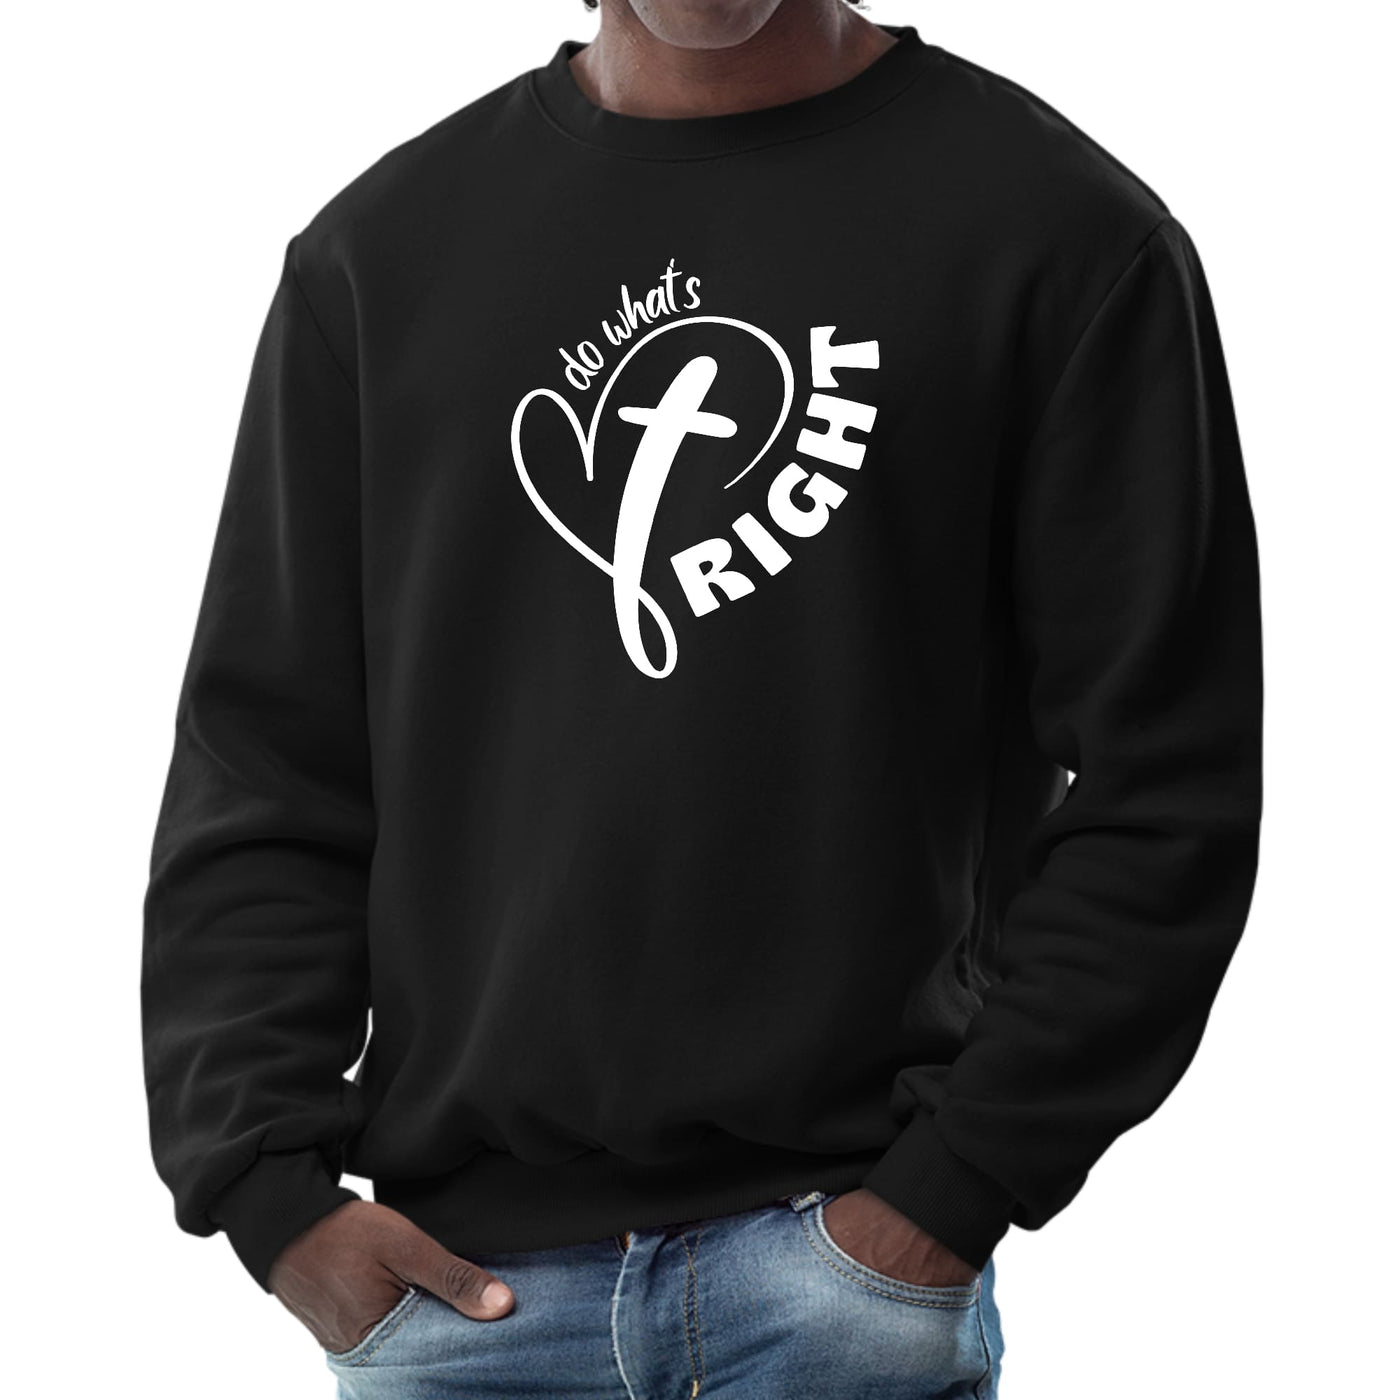 Mens Long Sleeve Graphic Sweatshirt Say It Soul - Do What’s Right - Mens